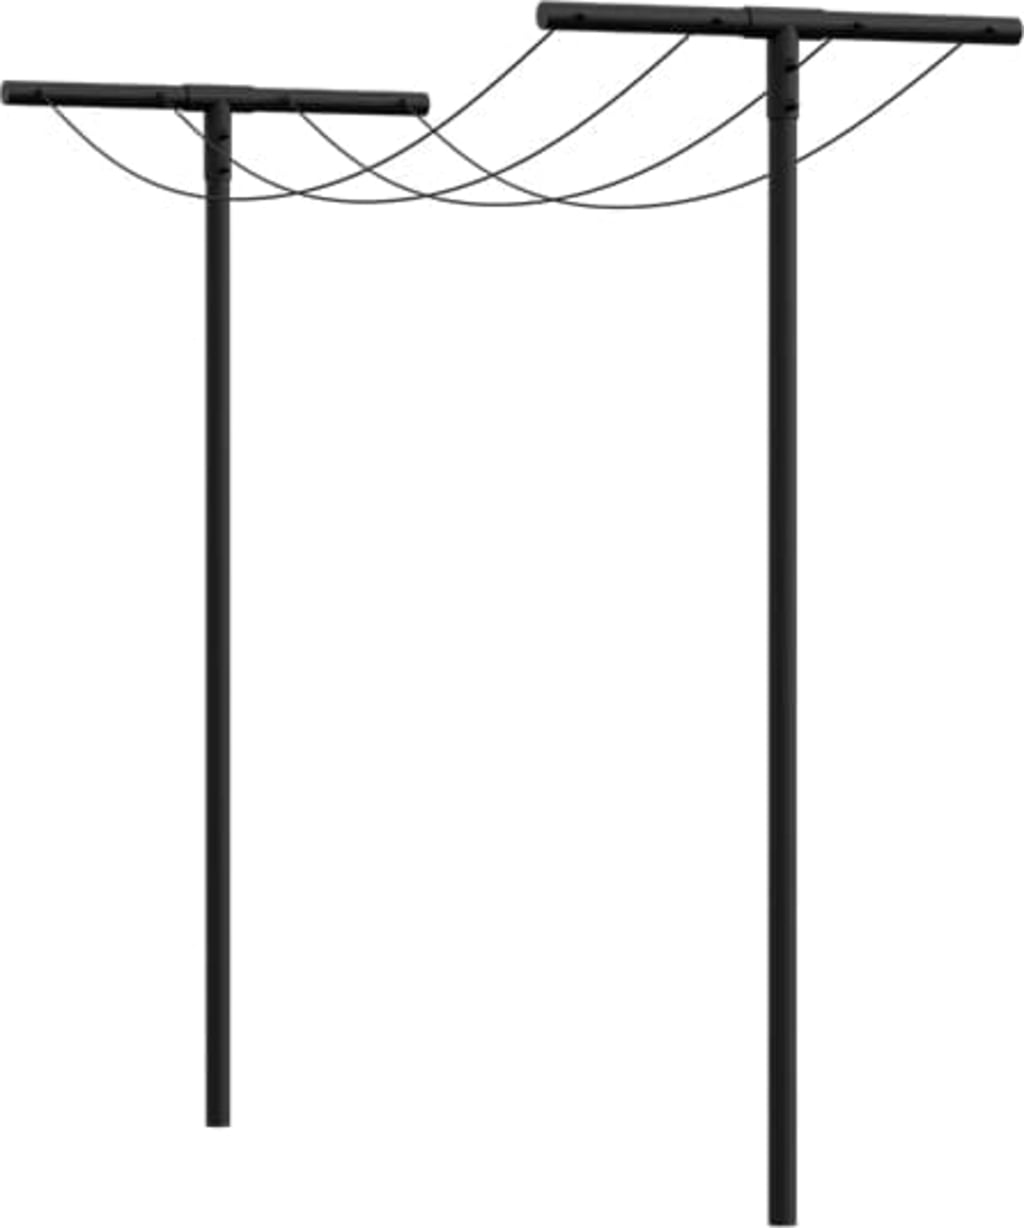 PLUS A/S Clothesline Poles, Tubular Steel with Clothesline and